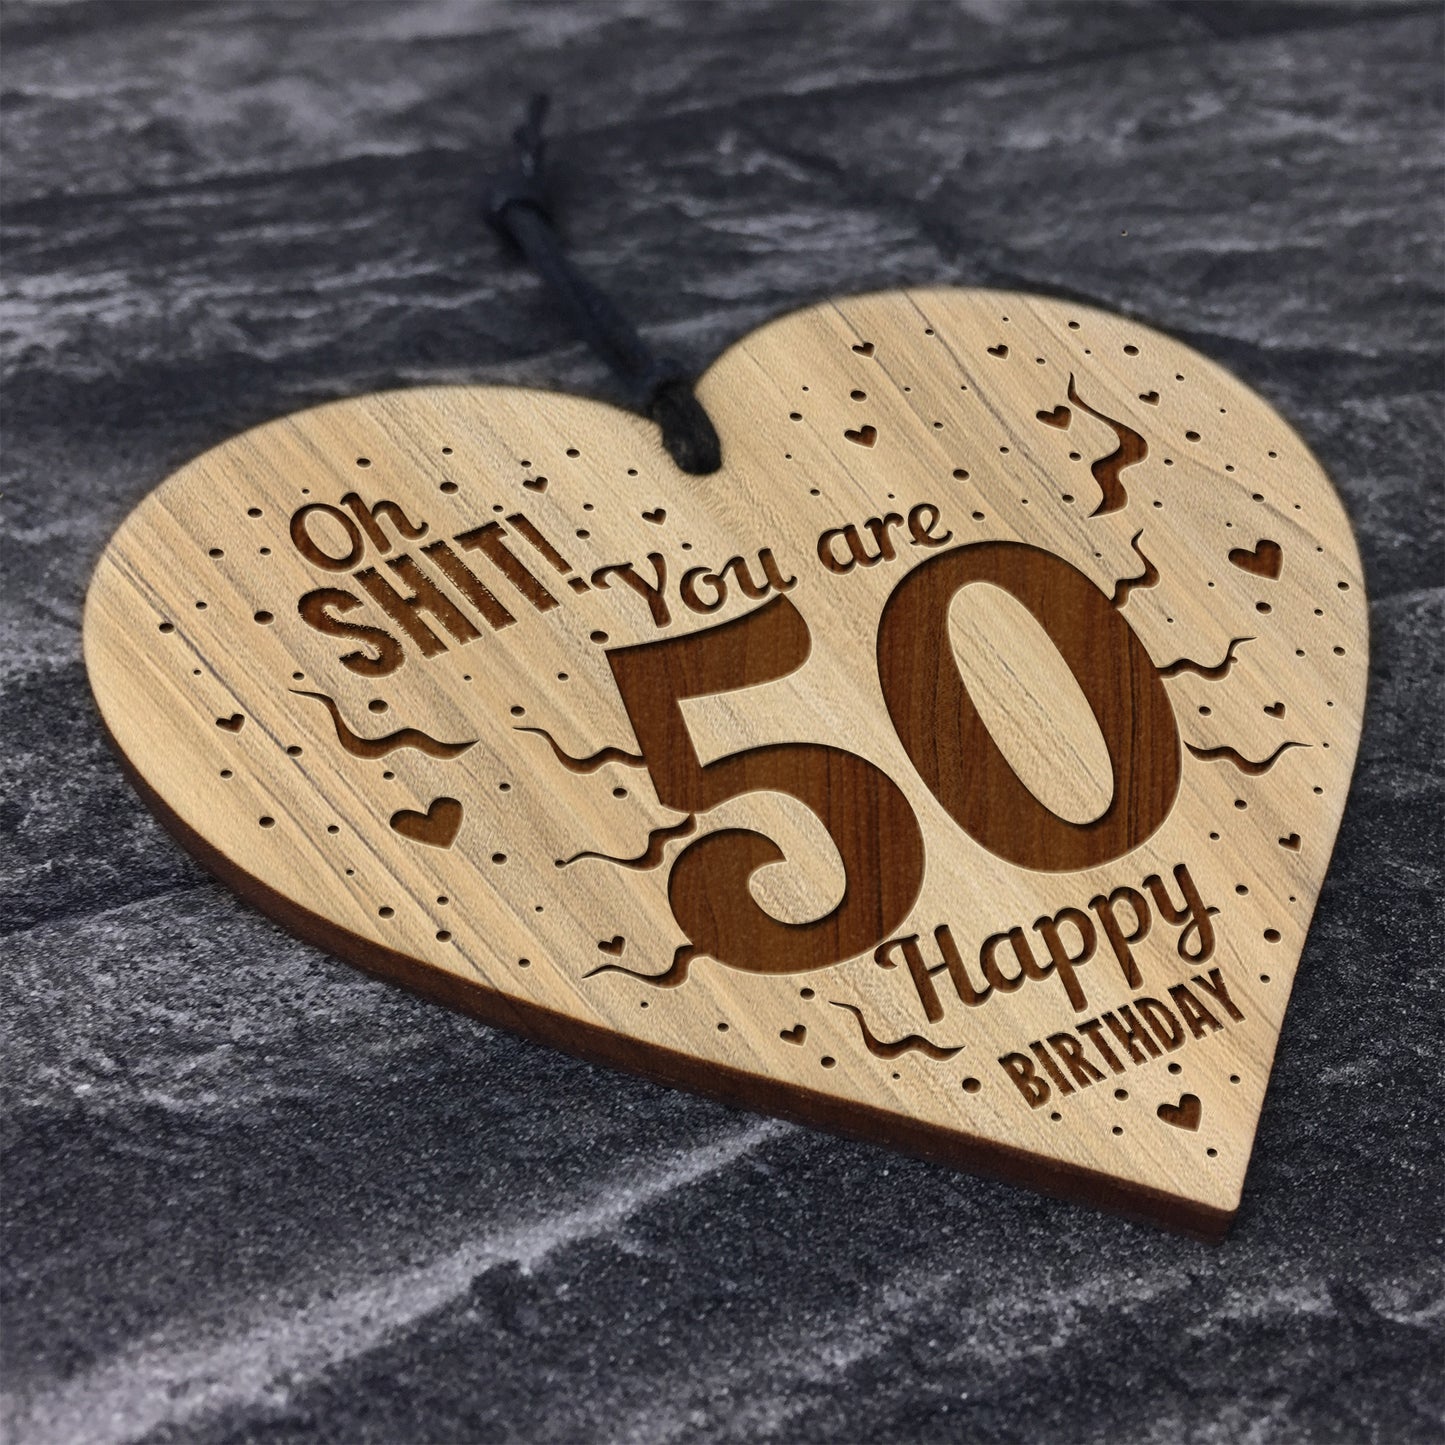 Rude Funny 50th Birthday Gift For Him Her Engraved Heart